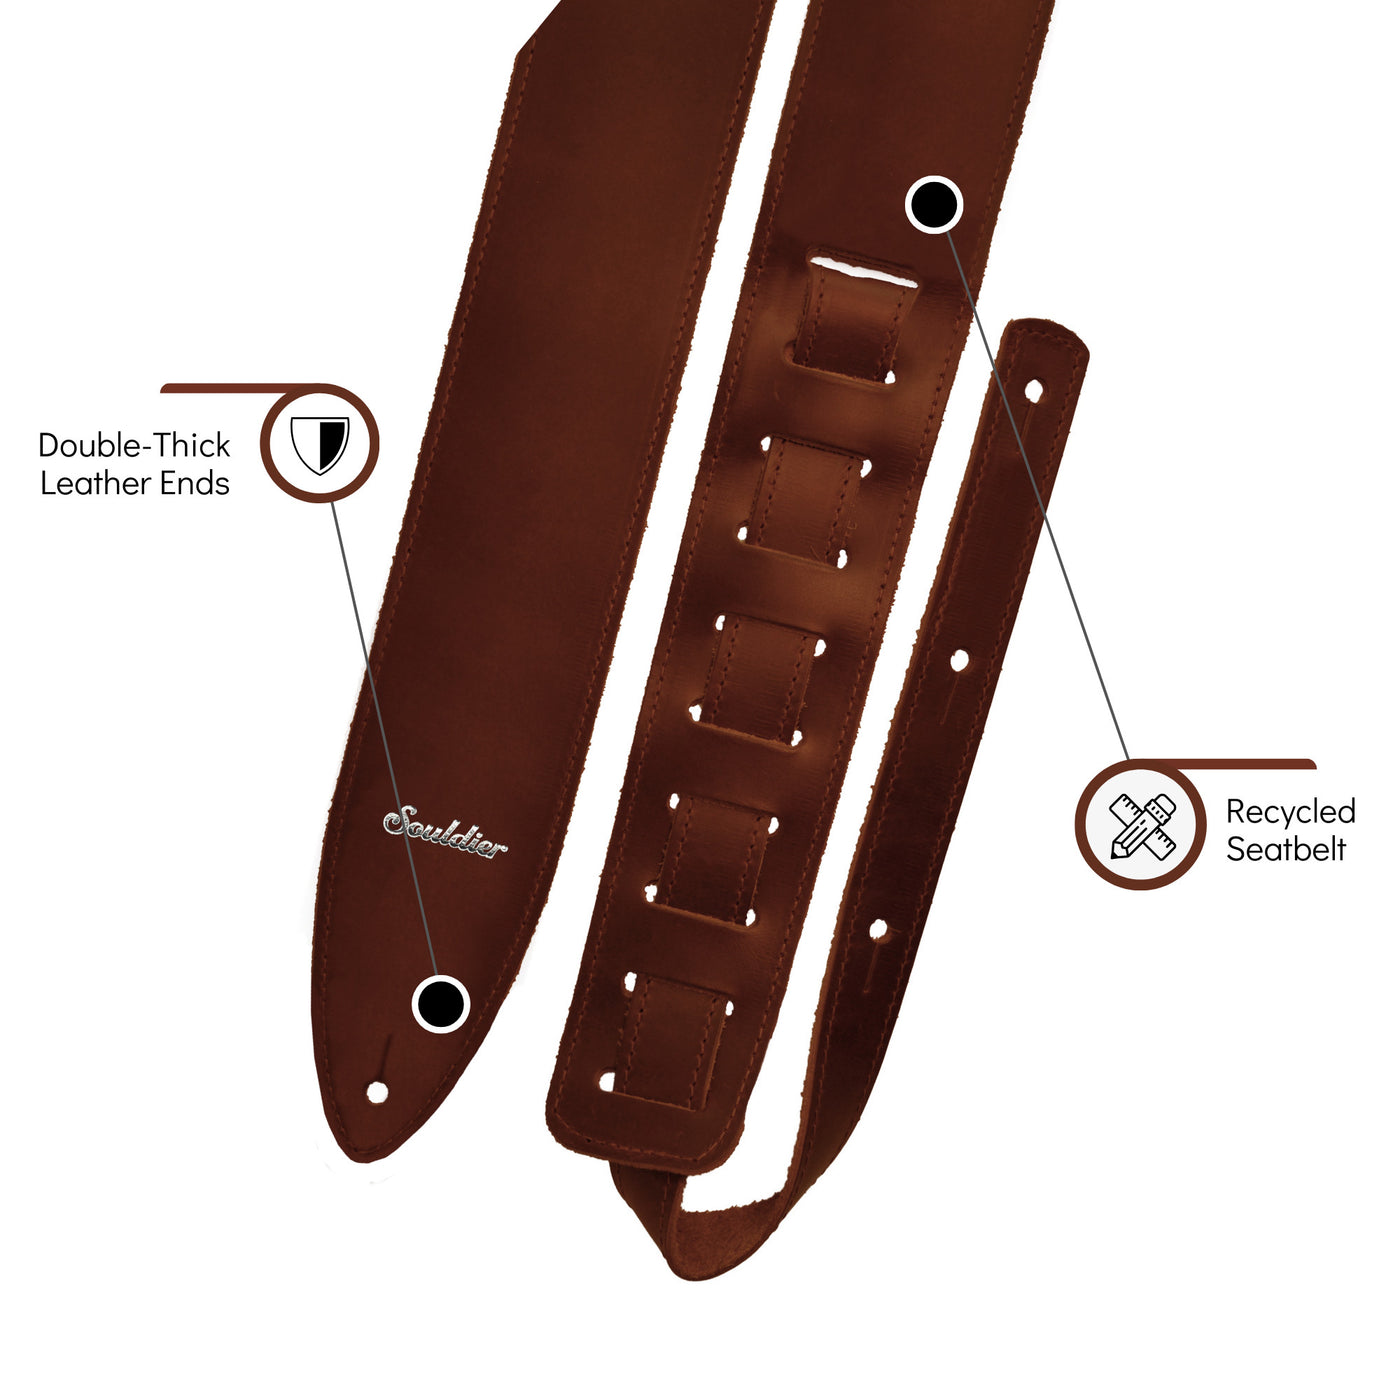 Souldier TGS0000BR02BR - Handmade Souldier Solid Torpedo Strap for Bass, Electric, or Acoustic Guitar, Adjustable Length from 42.5" to 55" Made in the USA, Brown